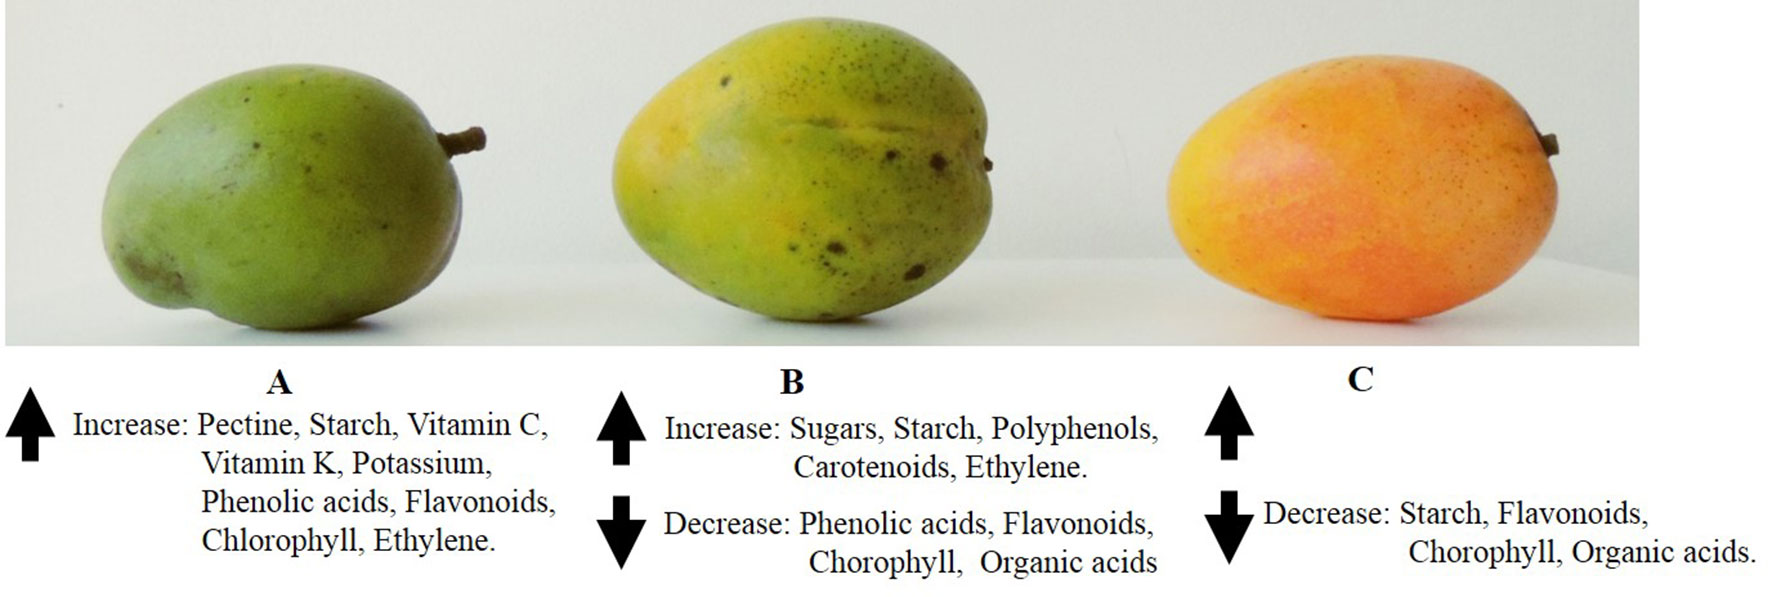 Frontiers Chemical Composition Of Mango Manera Indica L Fruit